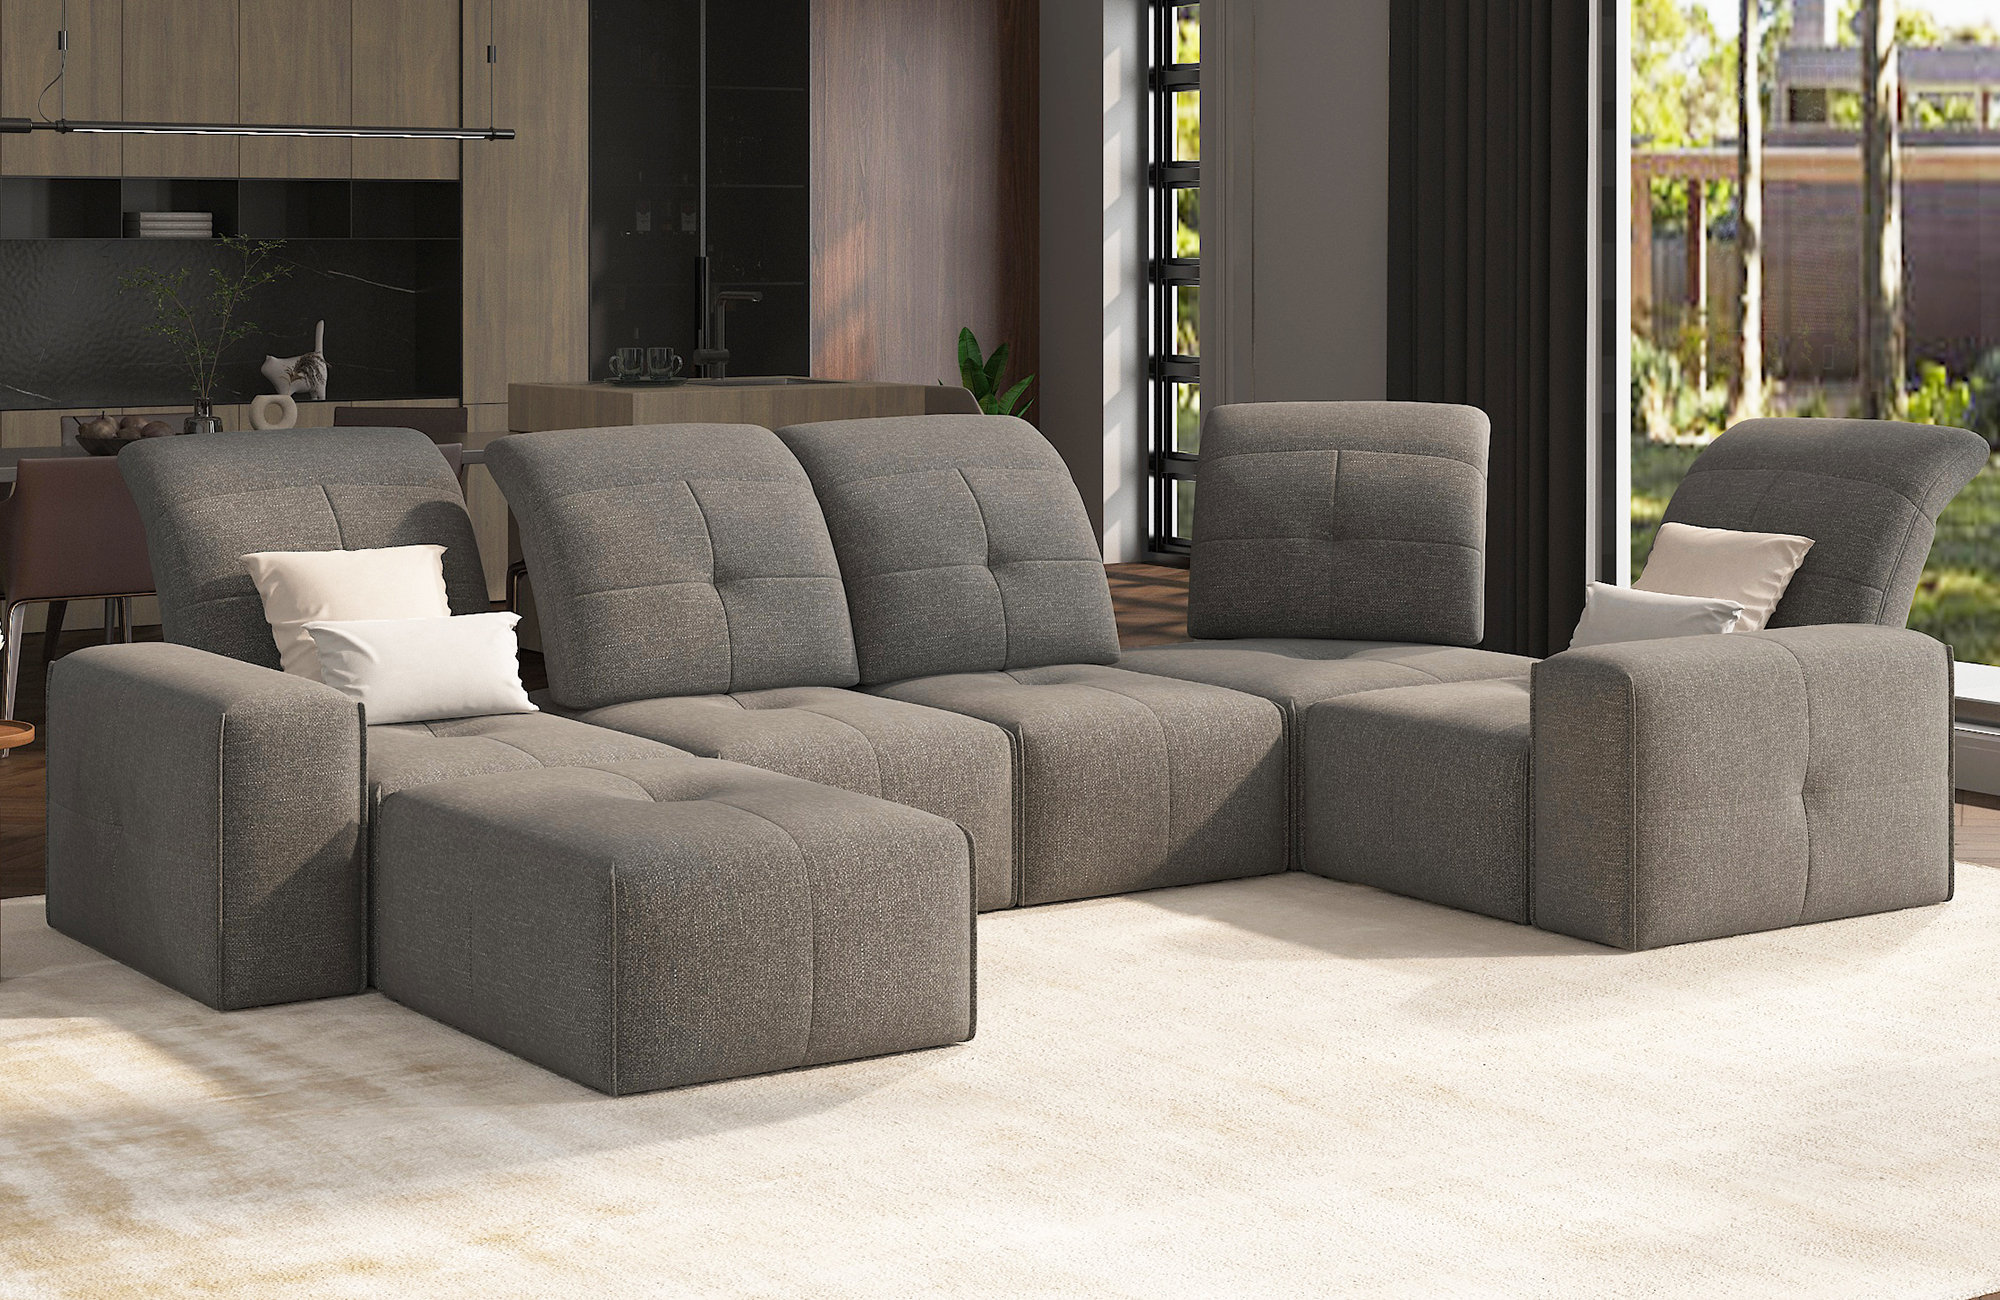 Sectional Sofa Beds With Adjustable Backrests: Customizing Your Seating Experience  